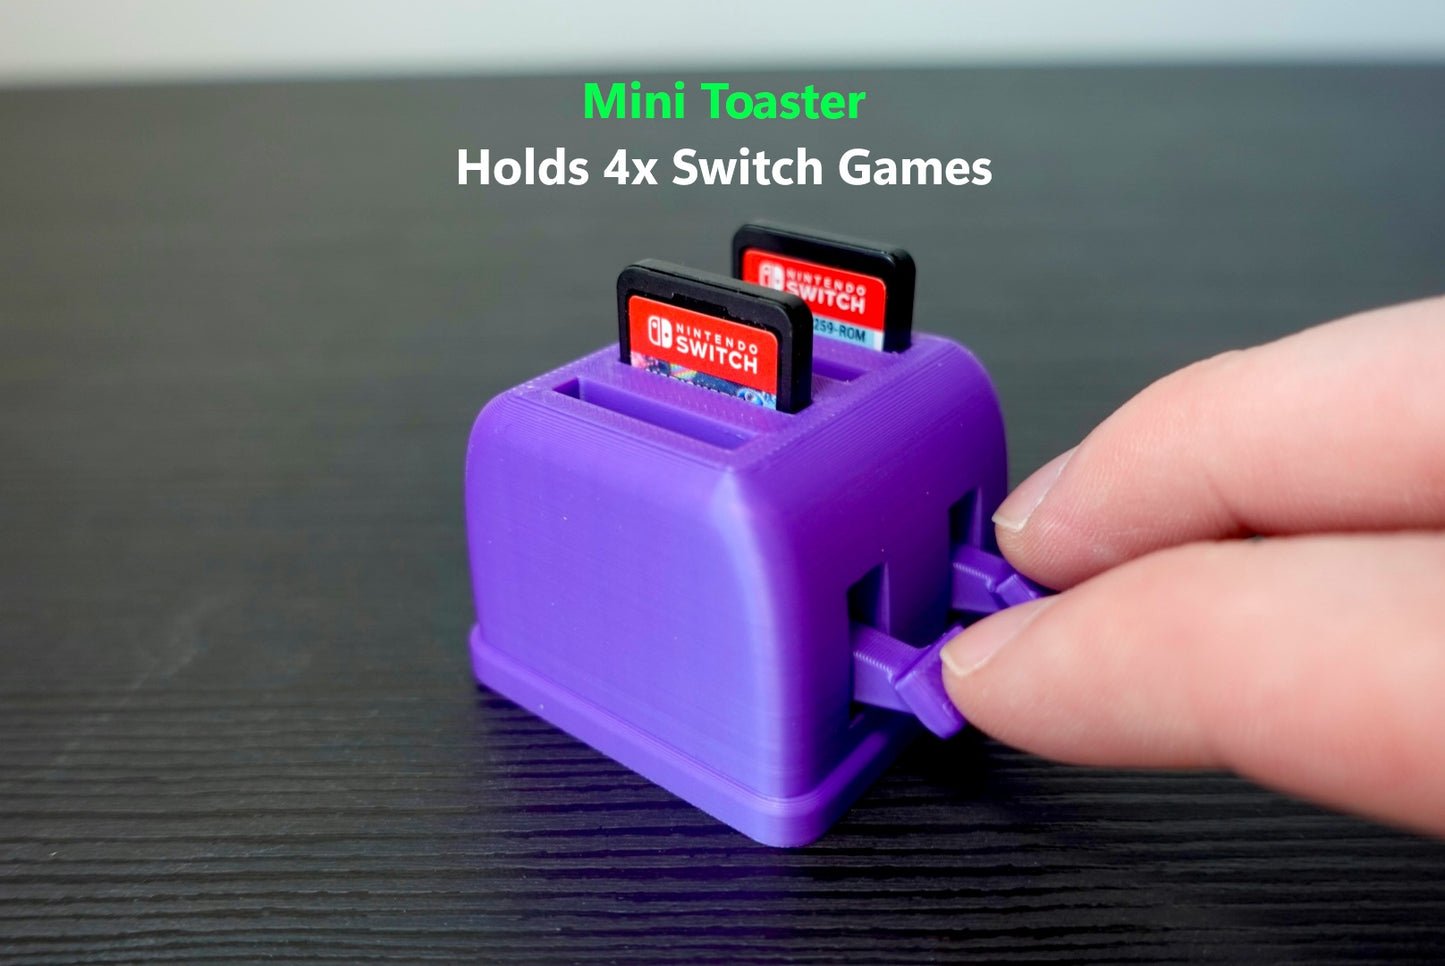 Mini Toaster Switch or SD card holder